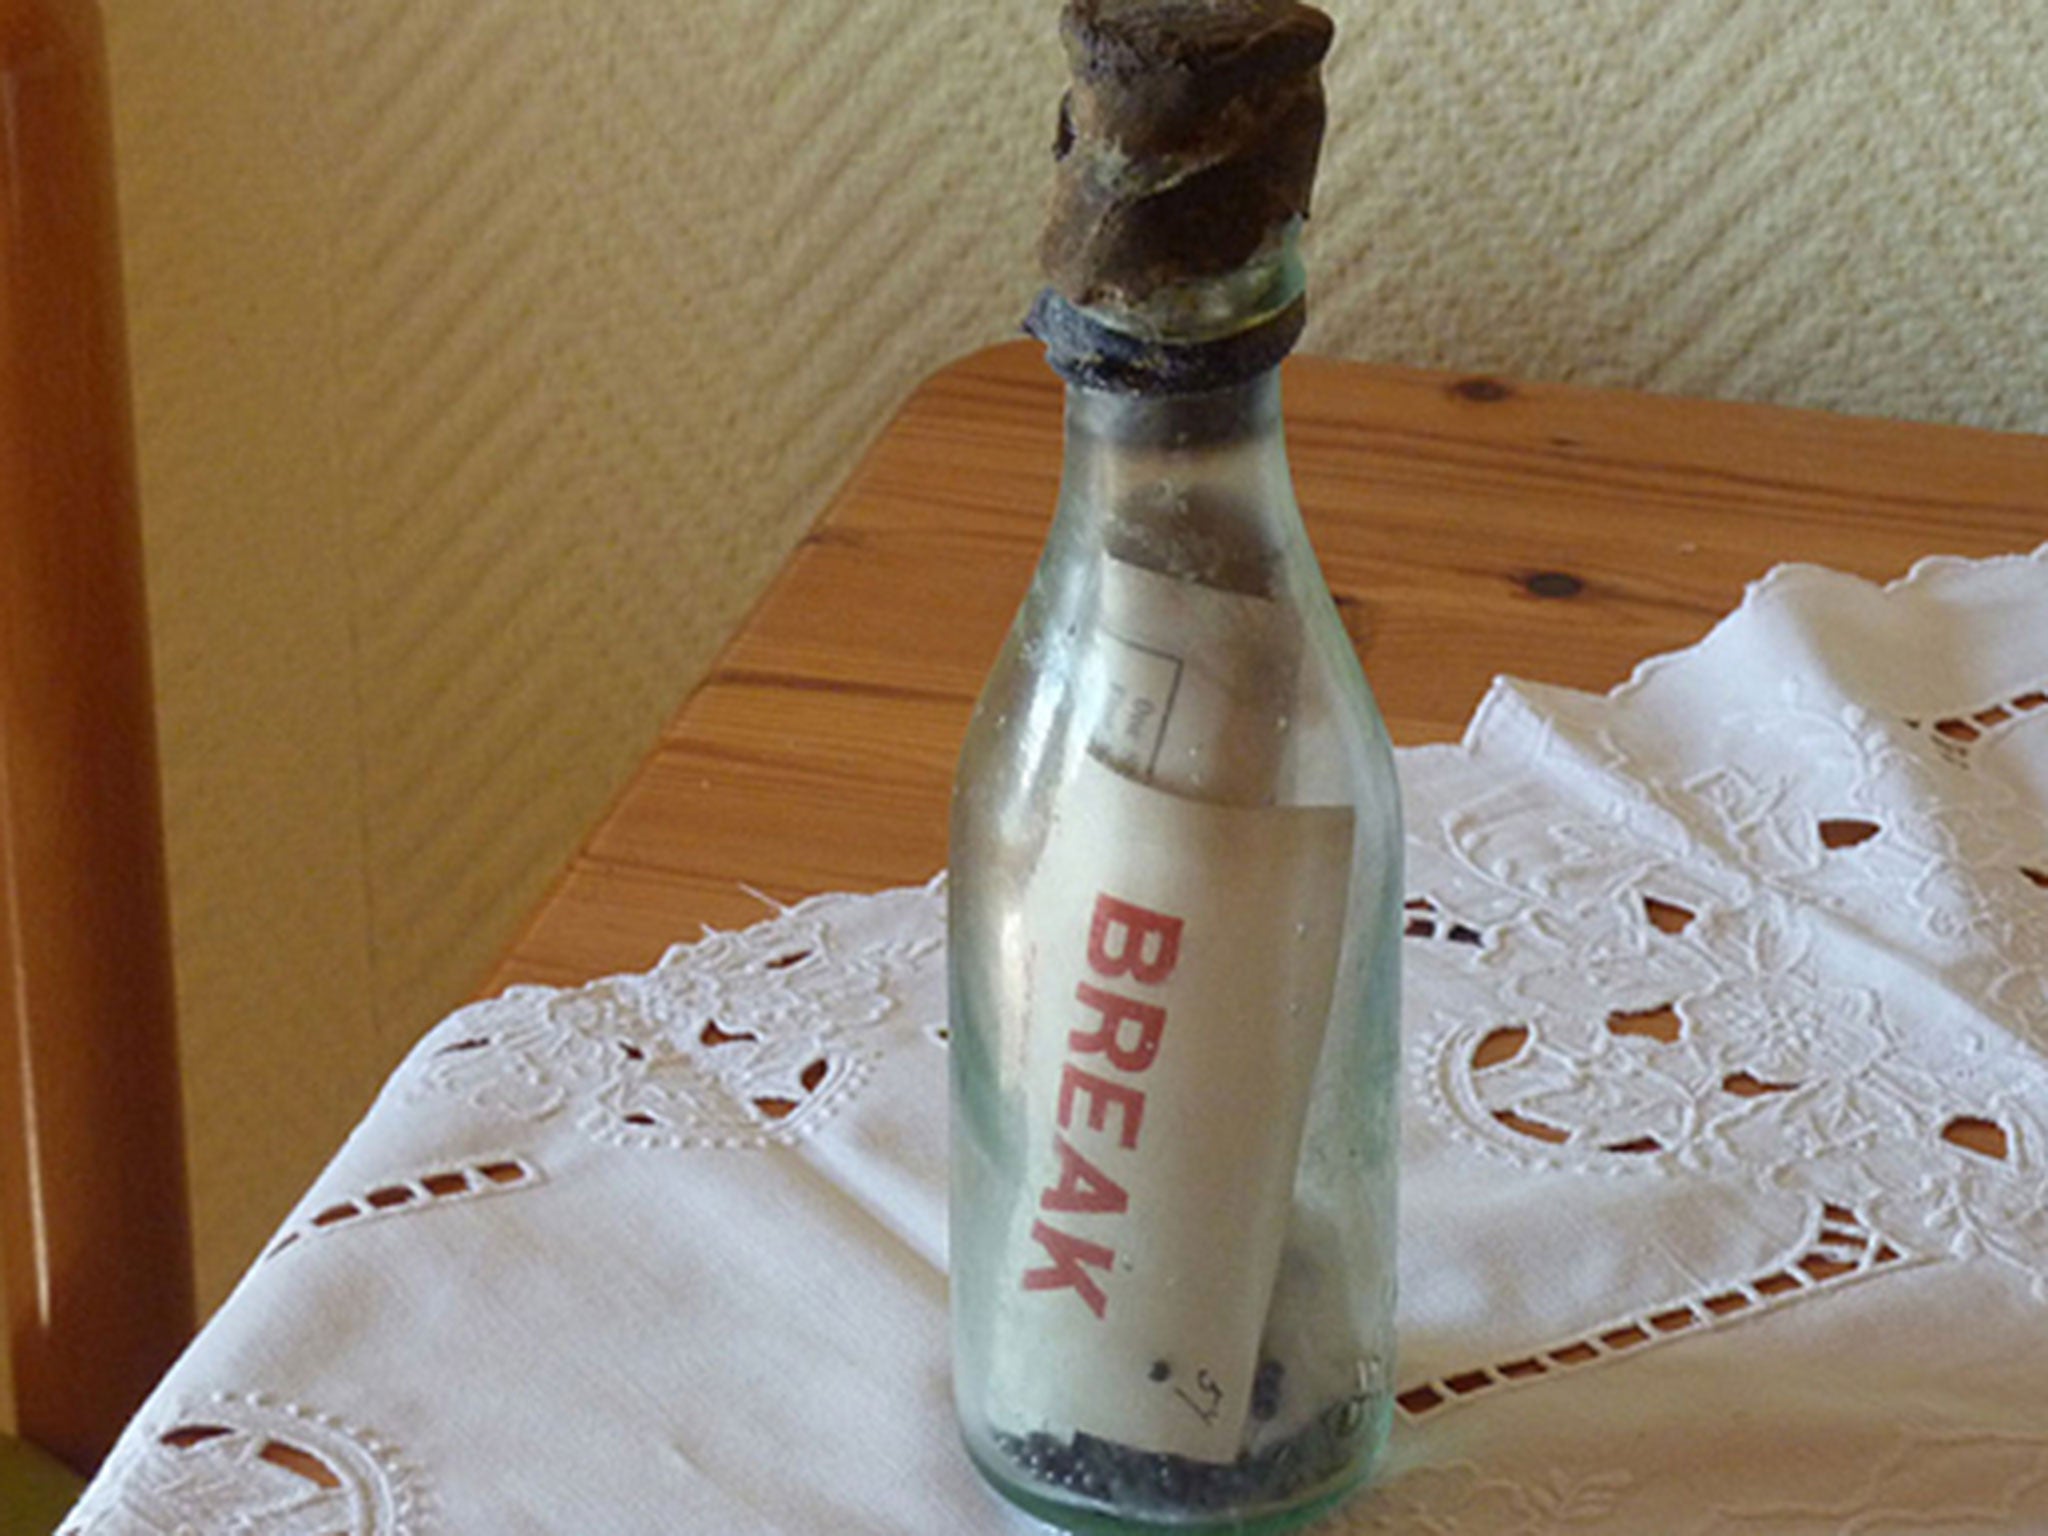 The couple smashed open the bottle to retrieve the note